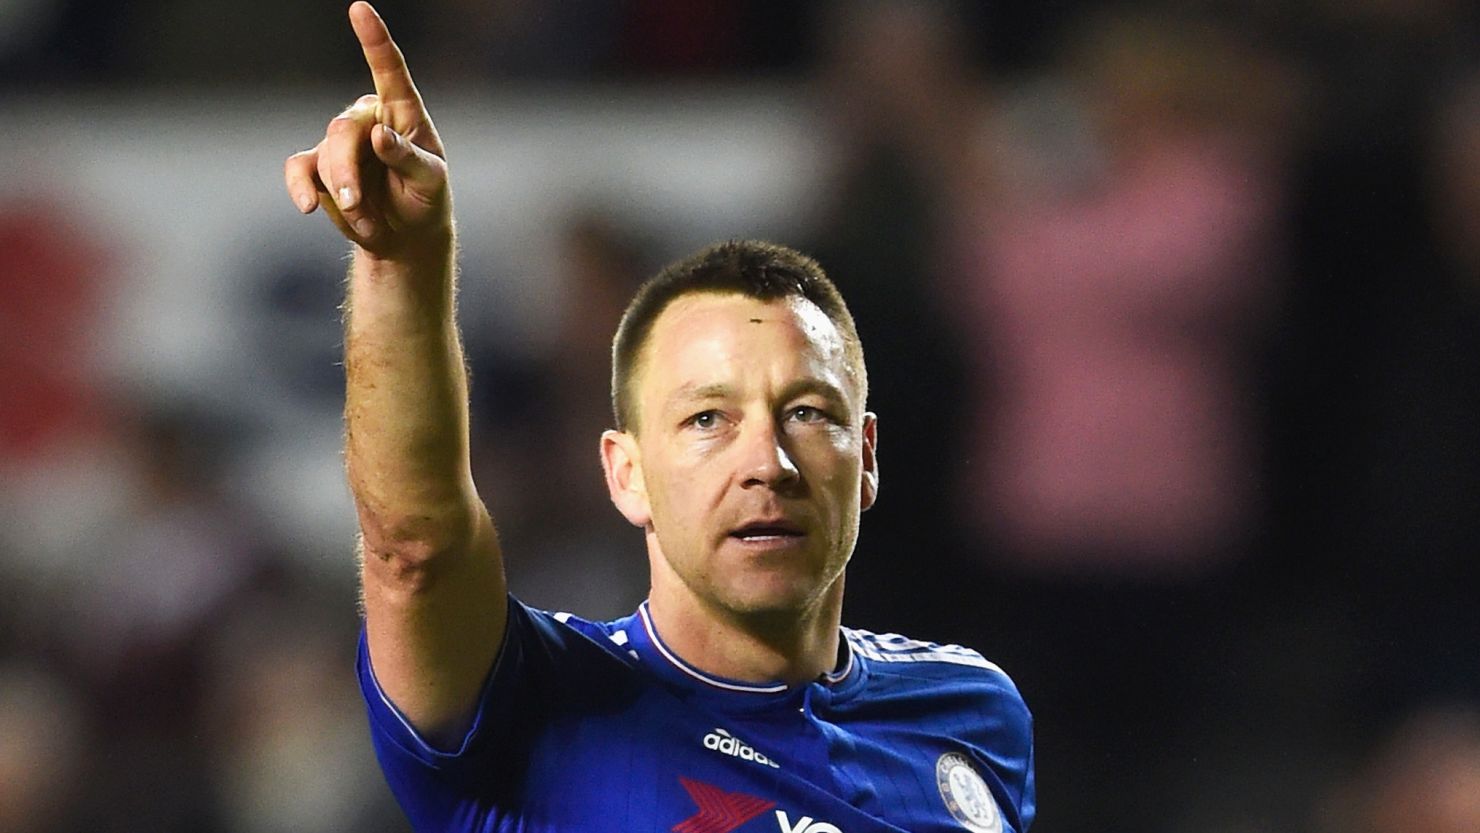 John Terry gestures to Chelsea fans after Sunday's win against Milton Keynes Dons.